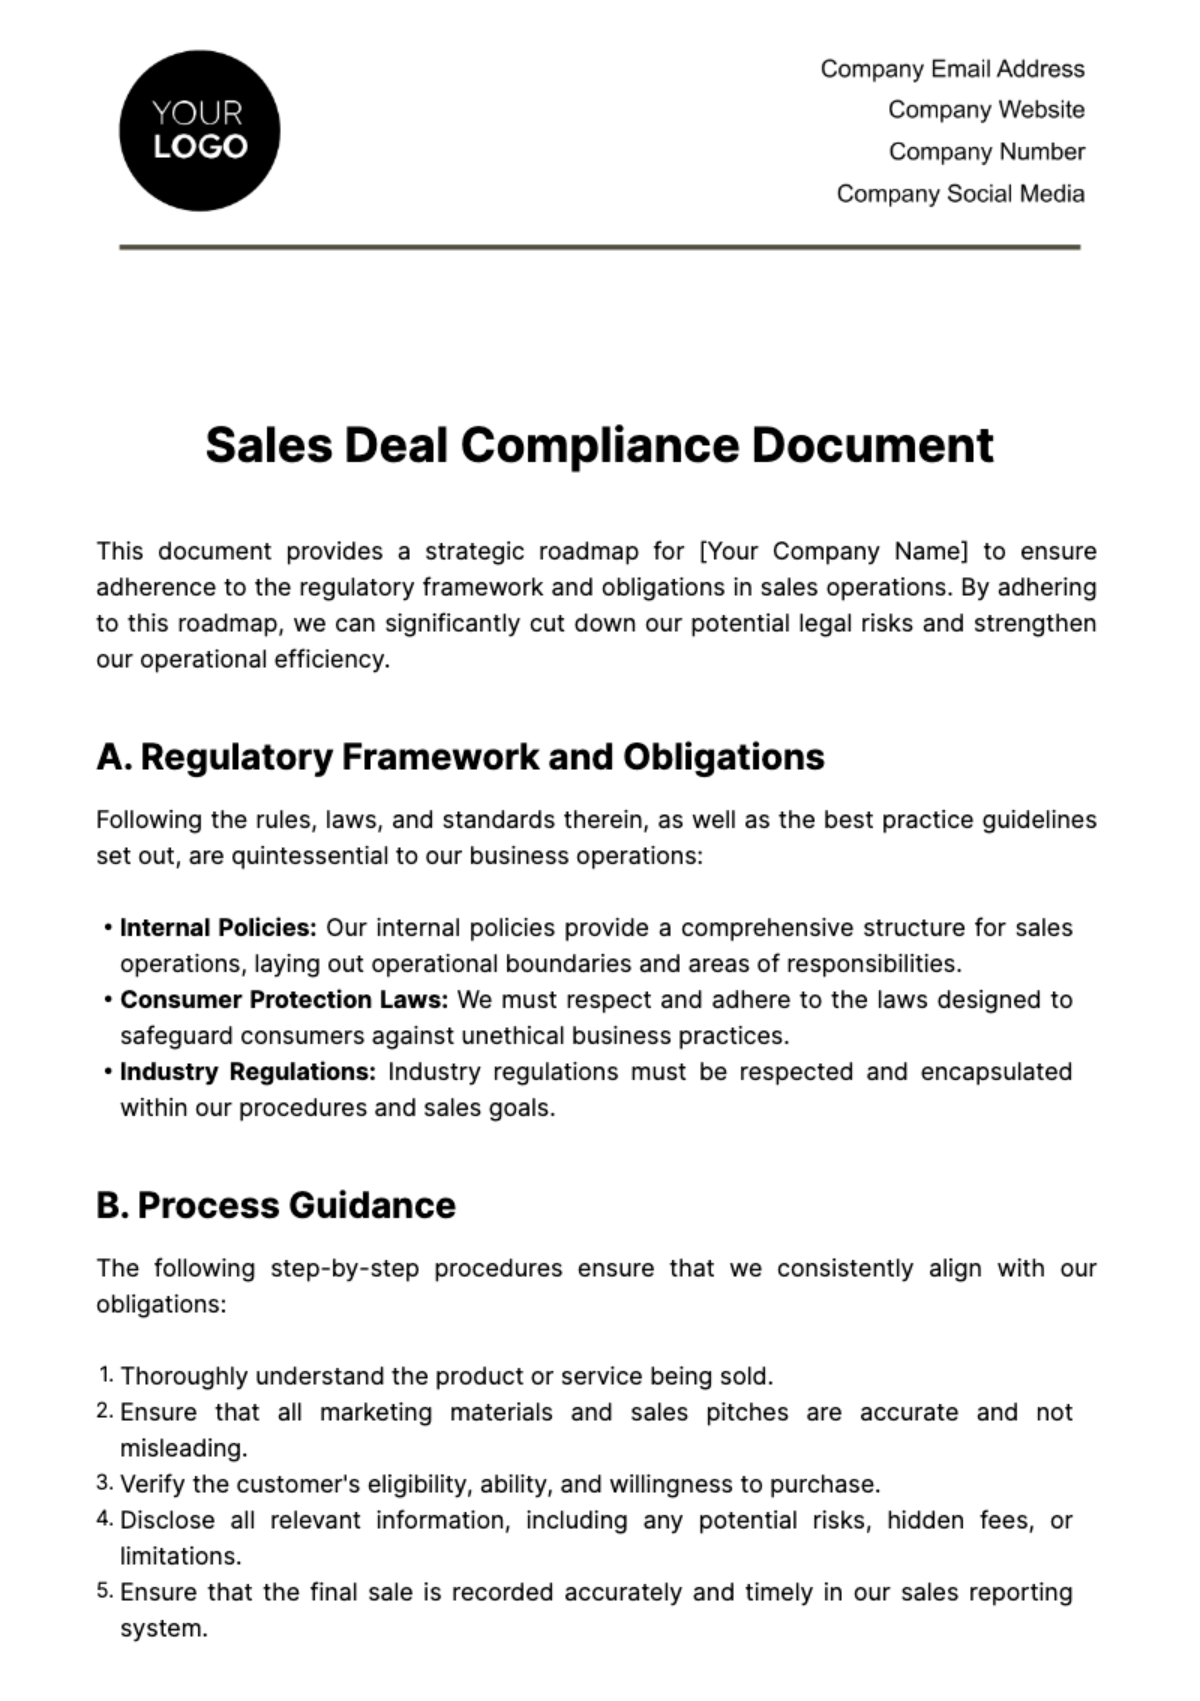 Free Sales Deal Compliance Document Template